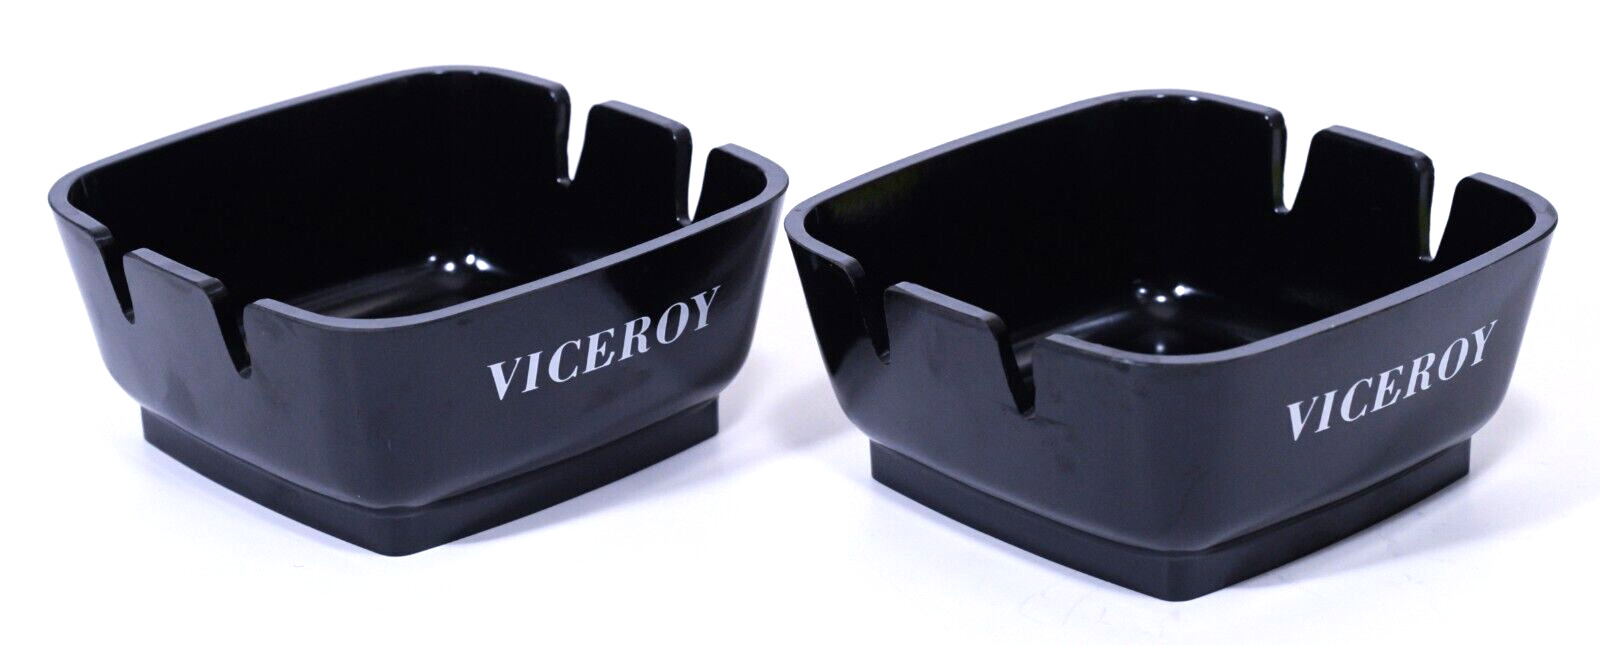 Lot of 2 Vintage Viceroy Filter Cigarettes Advertising Ashtray Made in USA